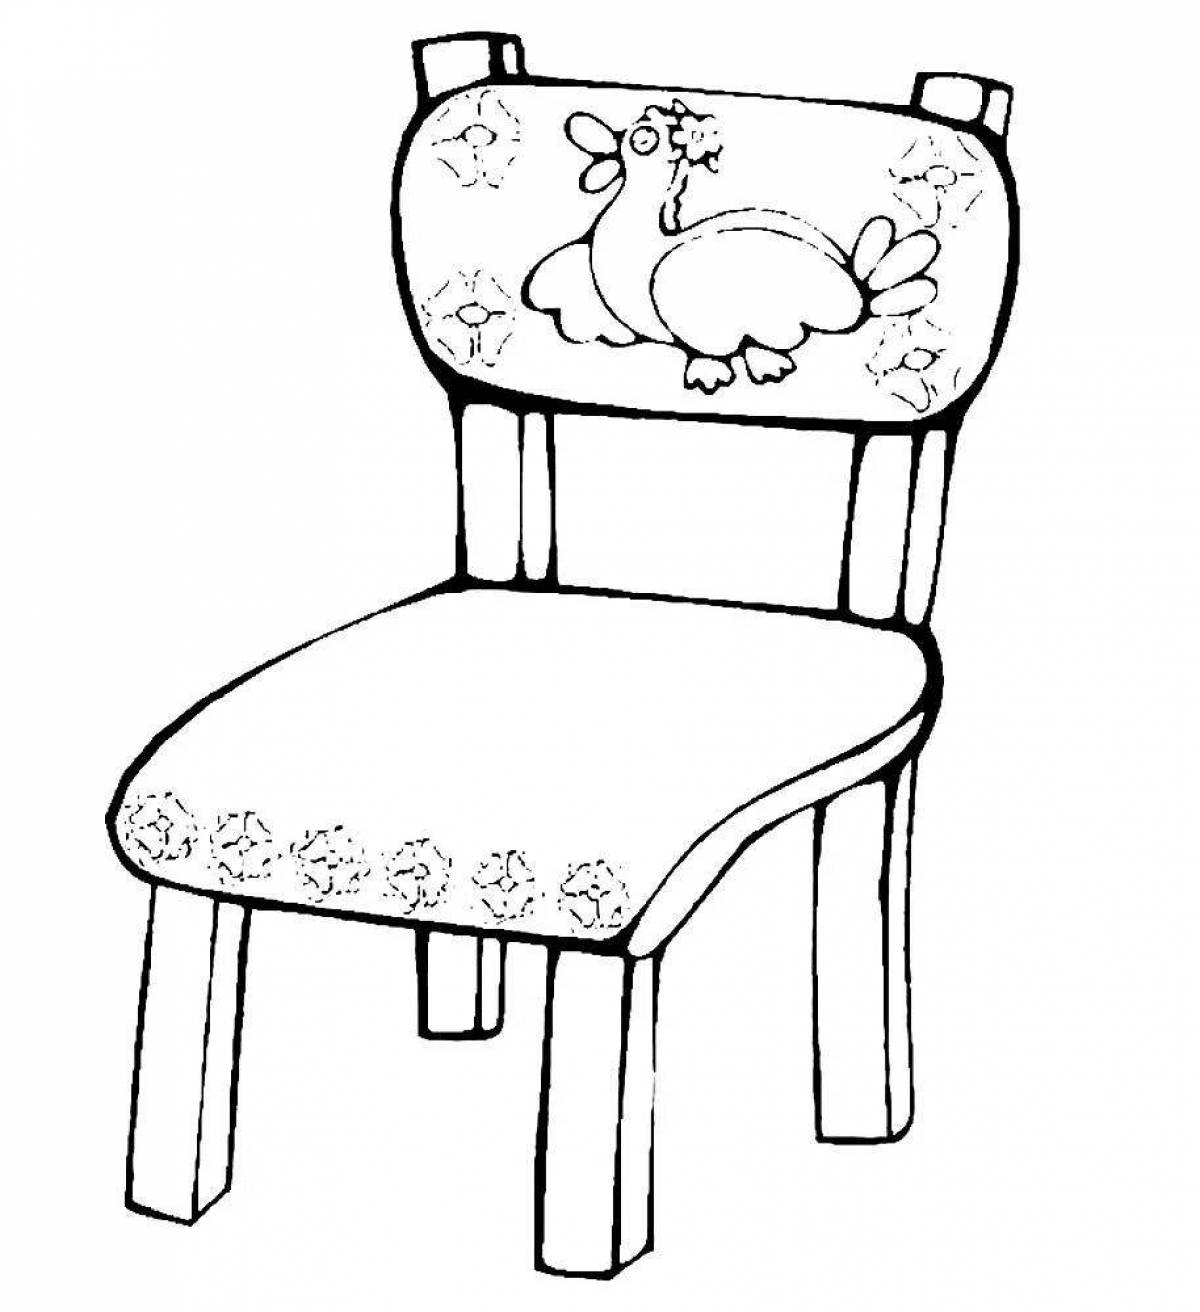 Coloring book shining chair